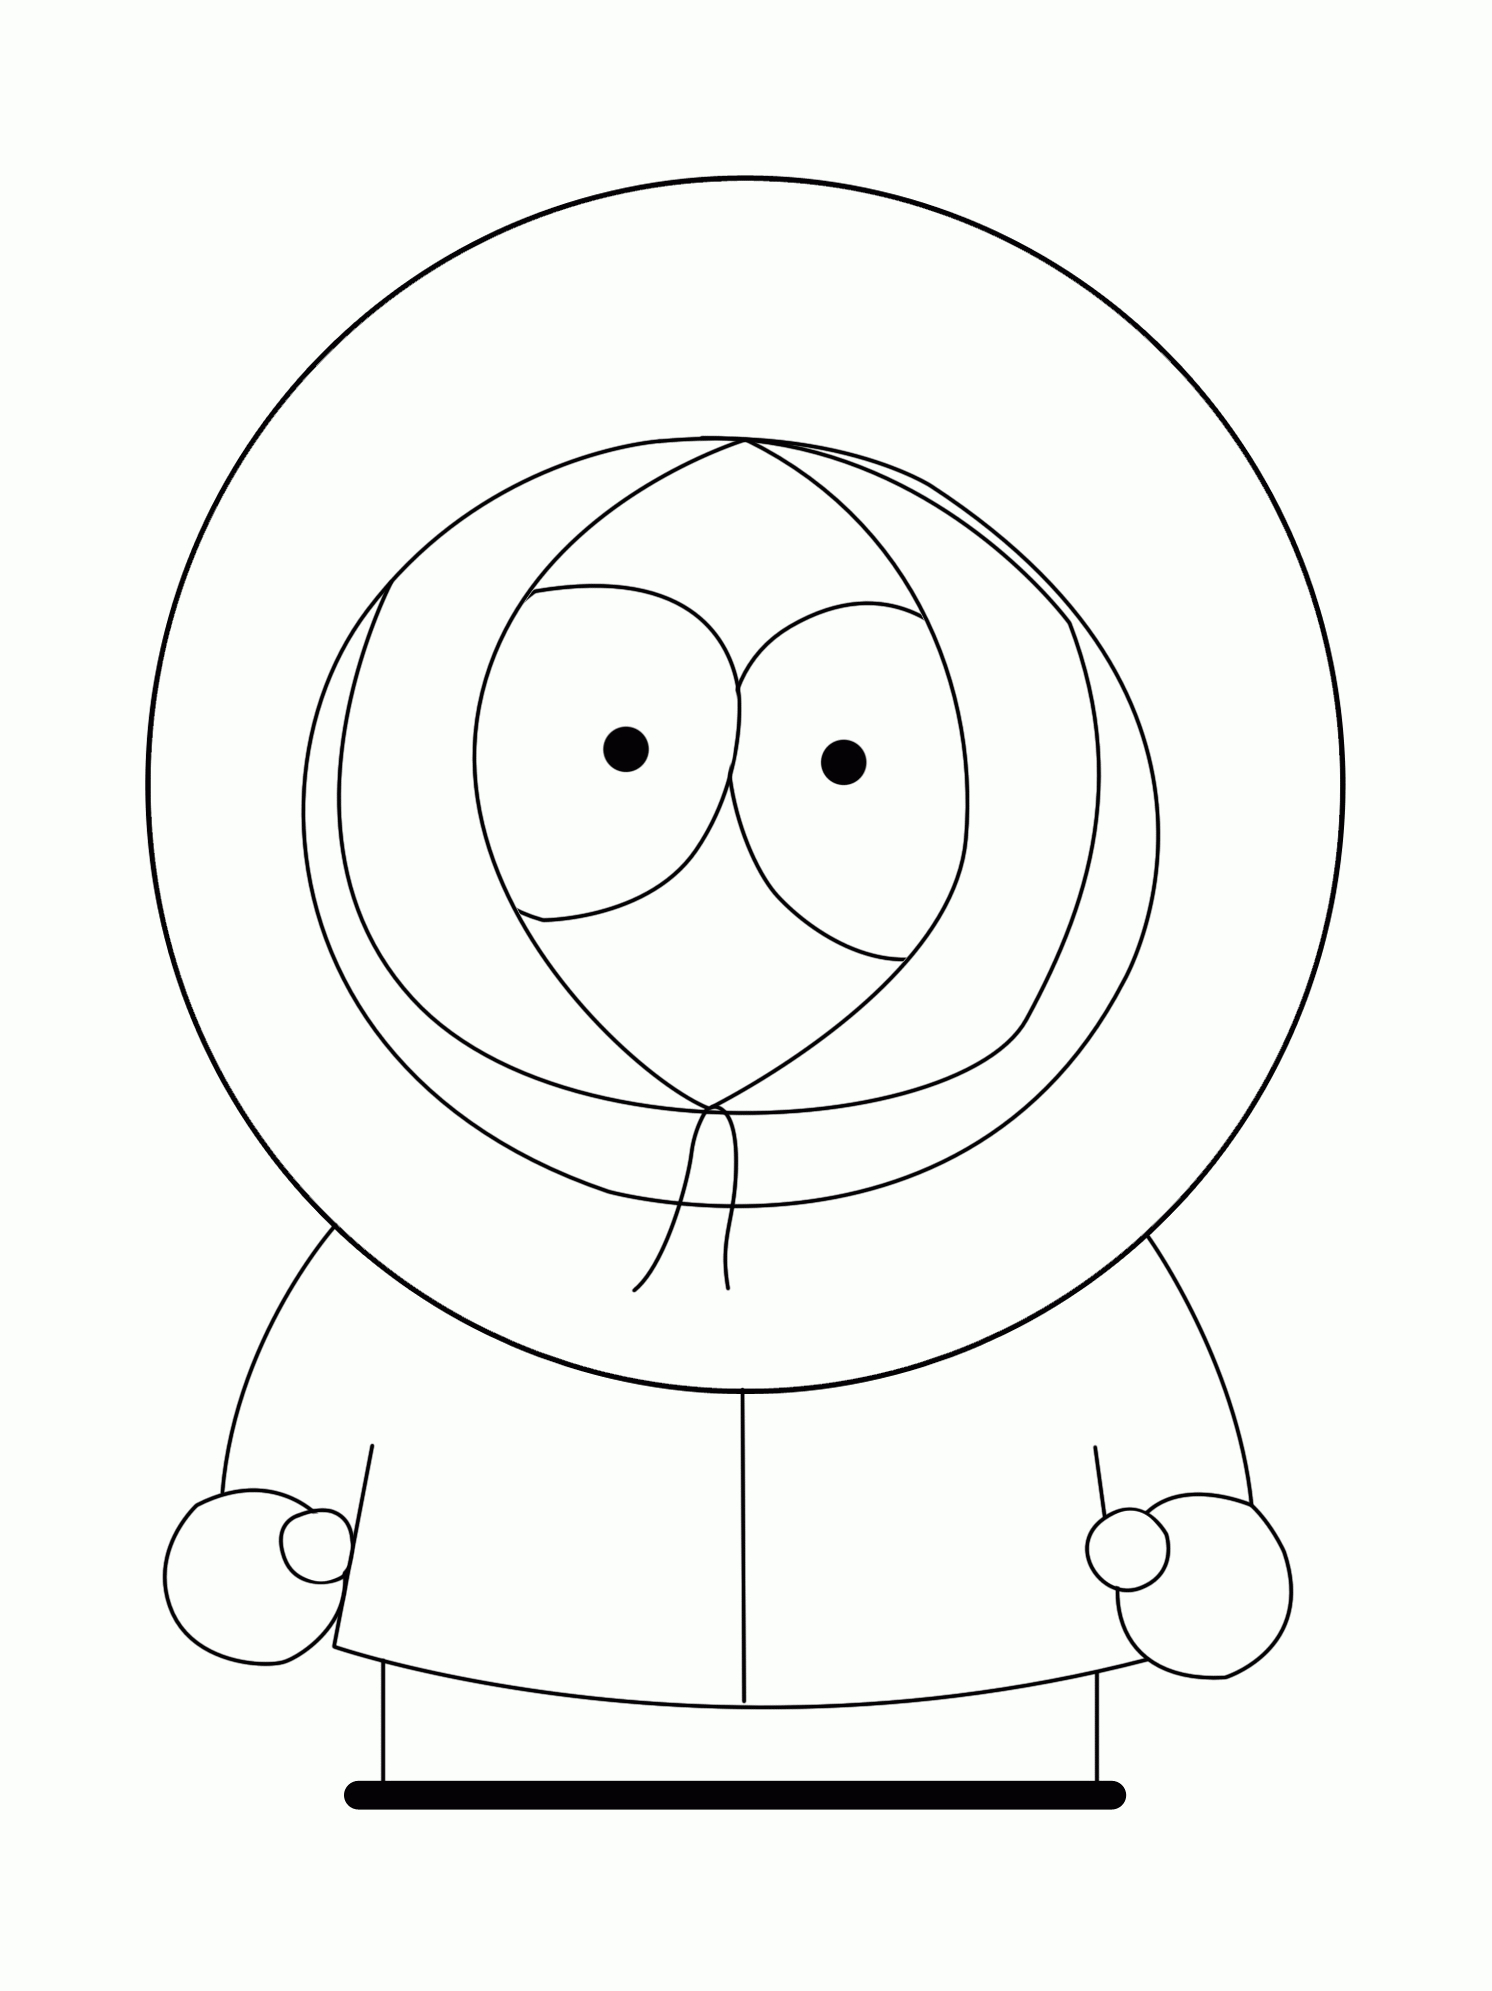 6 Pics Of South Park Kenny Coloring Pages - South Park Coloring - Free Printable South Park Coloring Pages